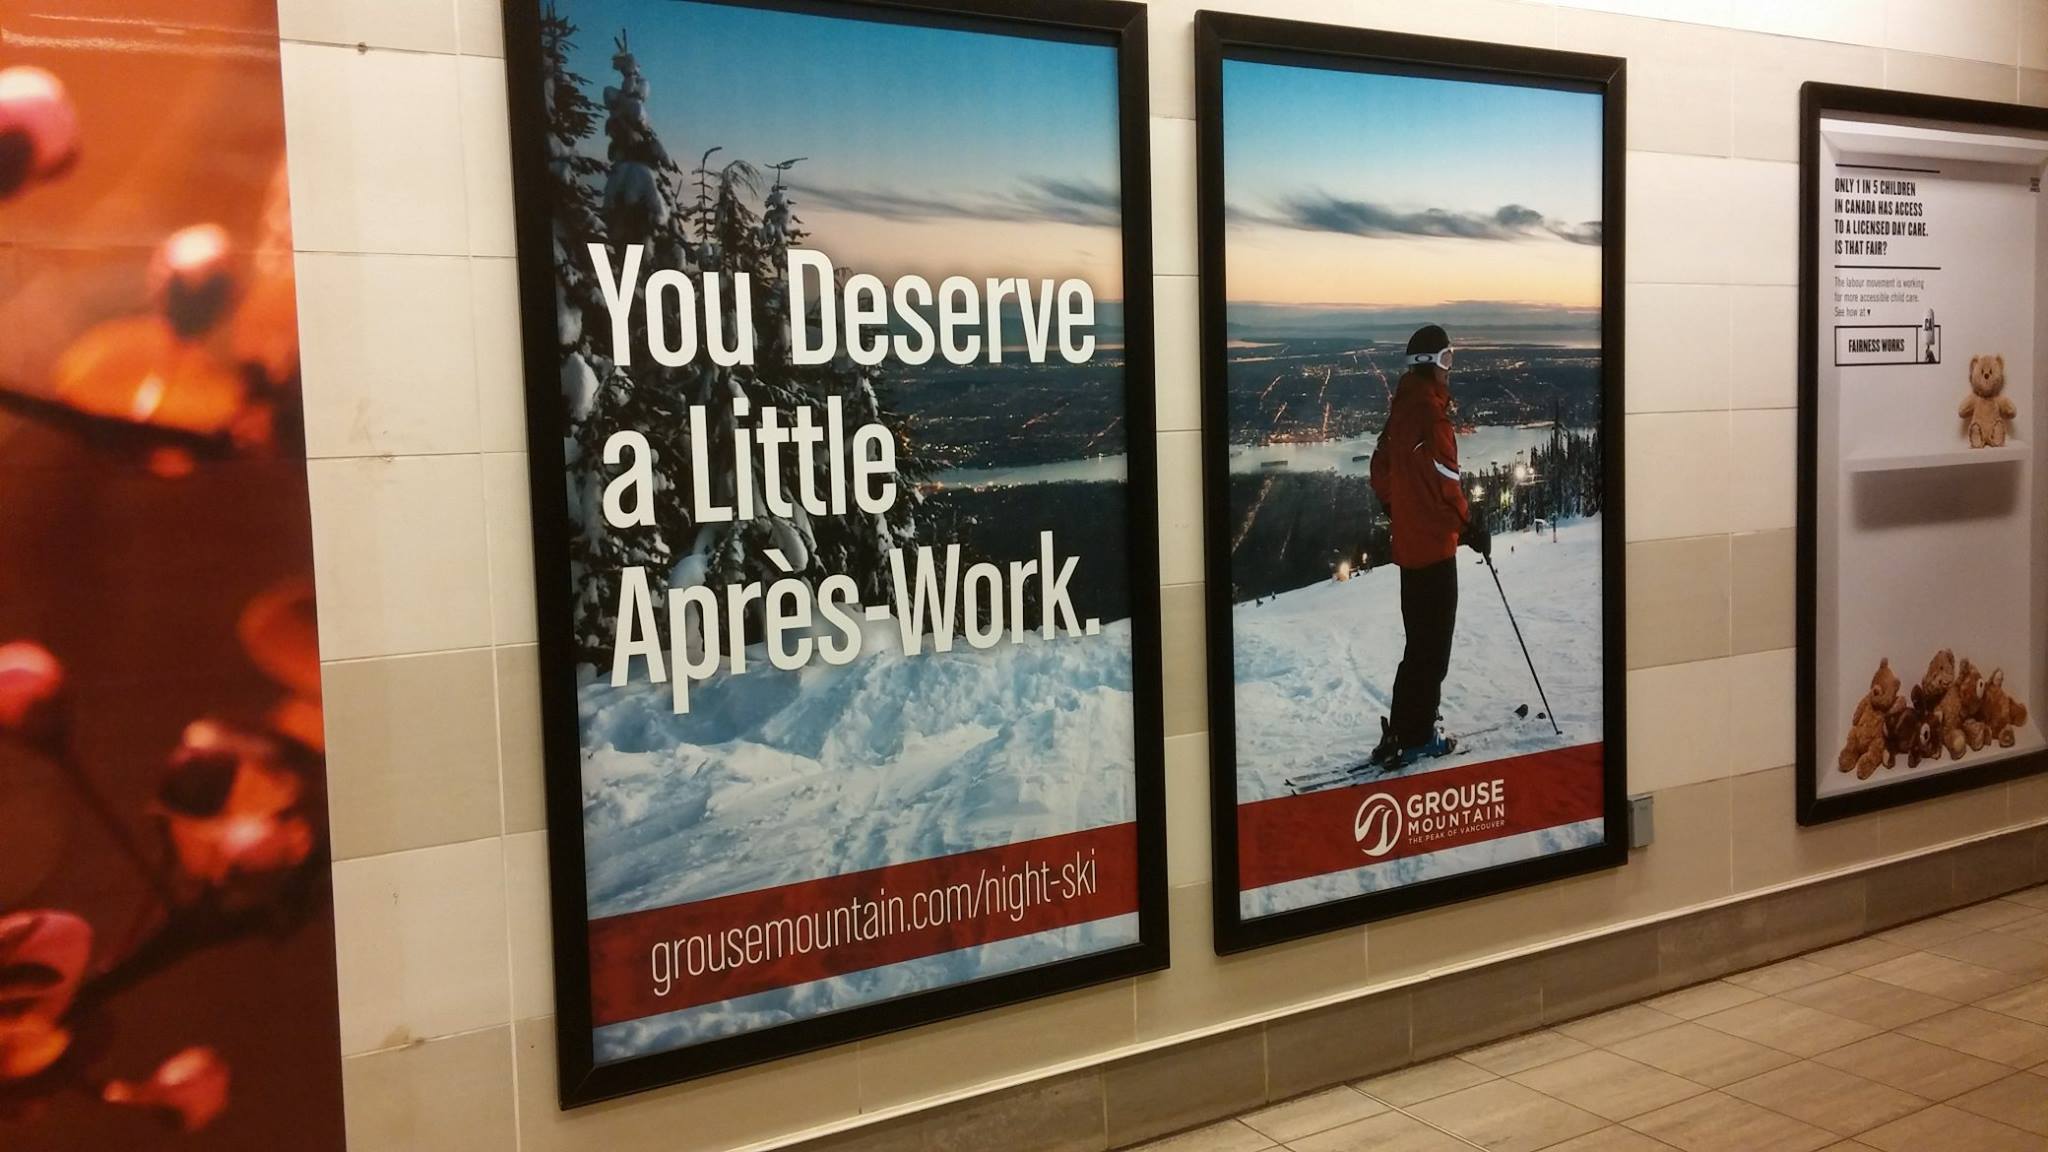 An ad for skiing, saying, "You deserve a little après-work."